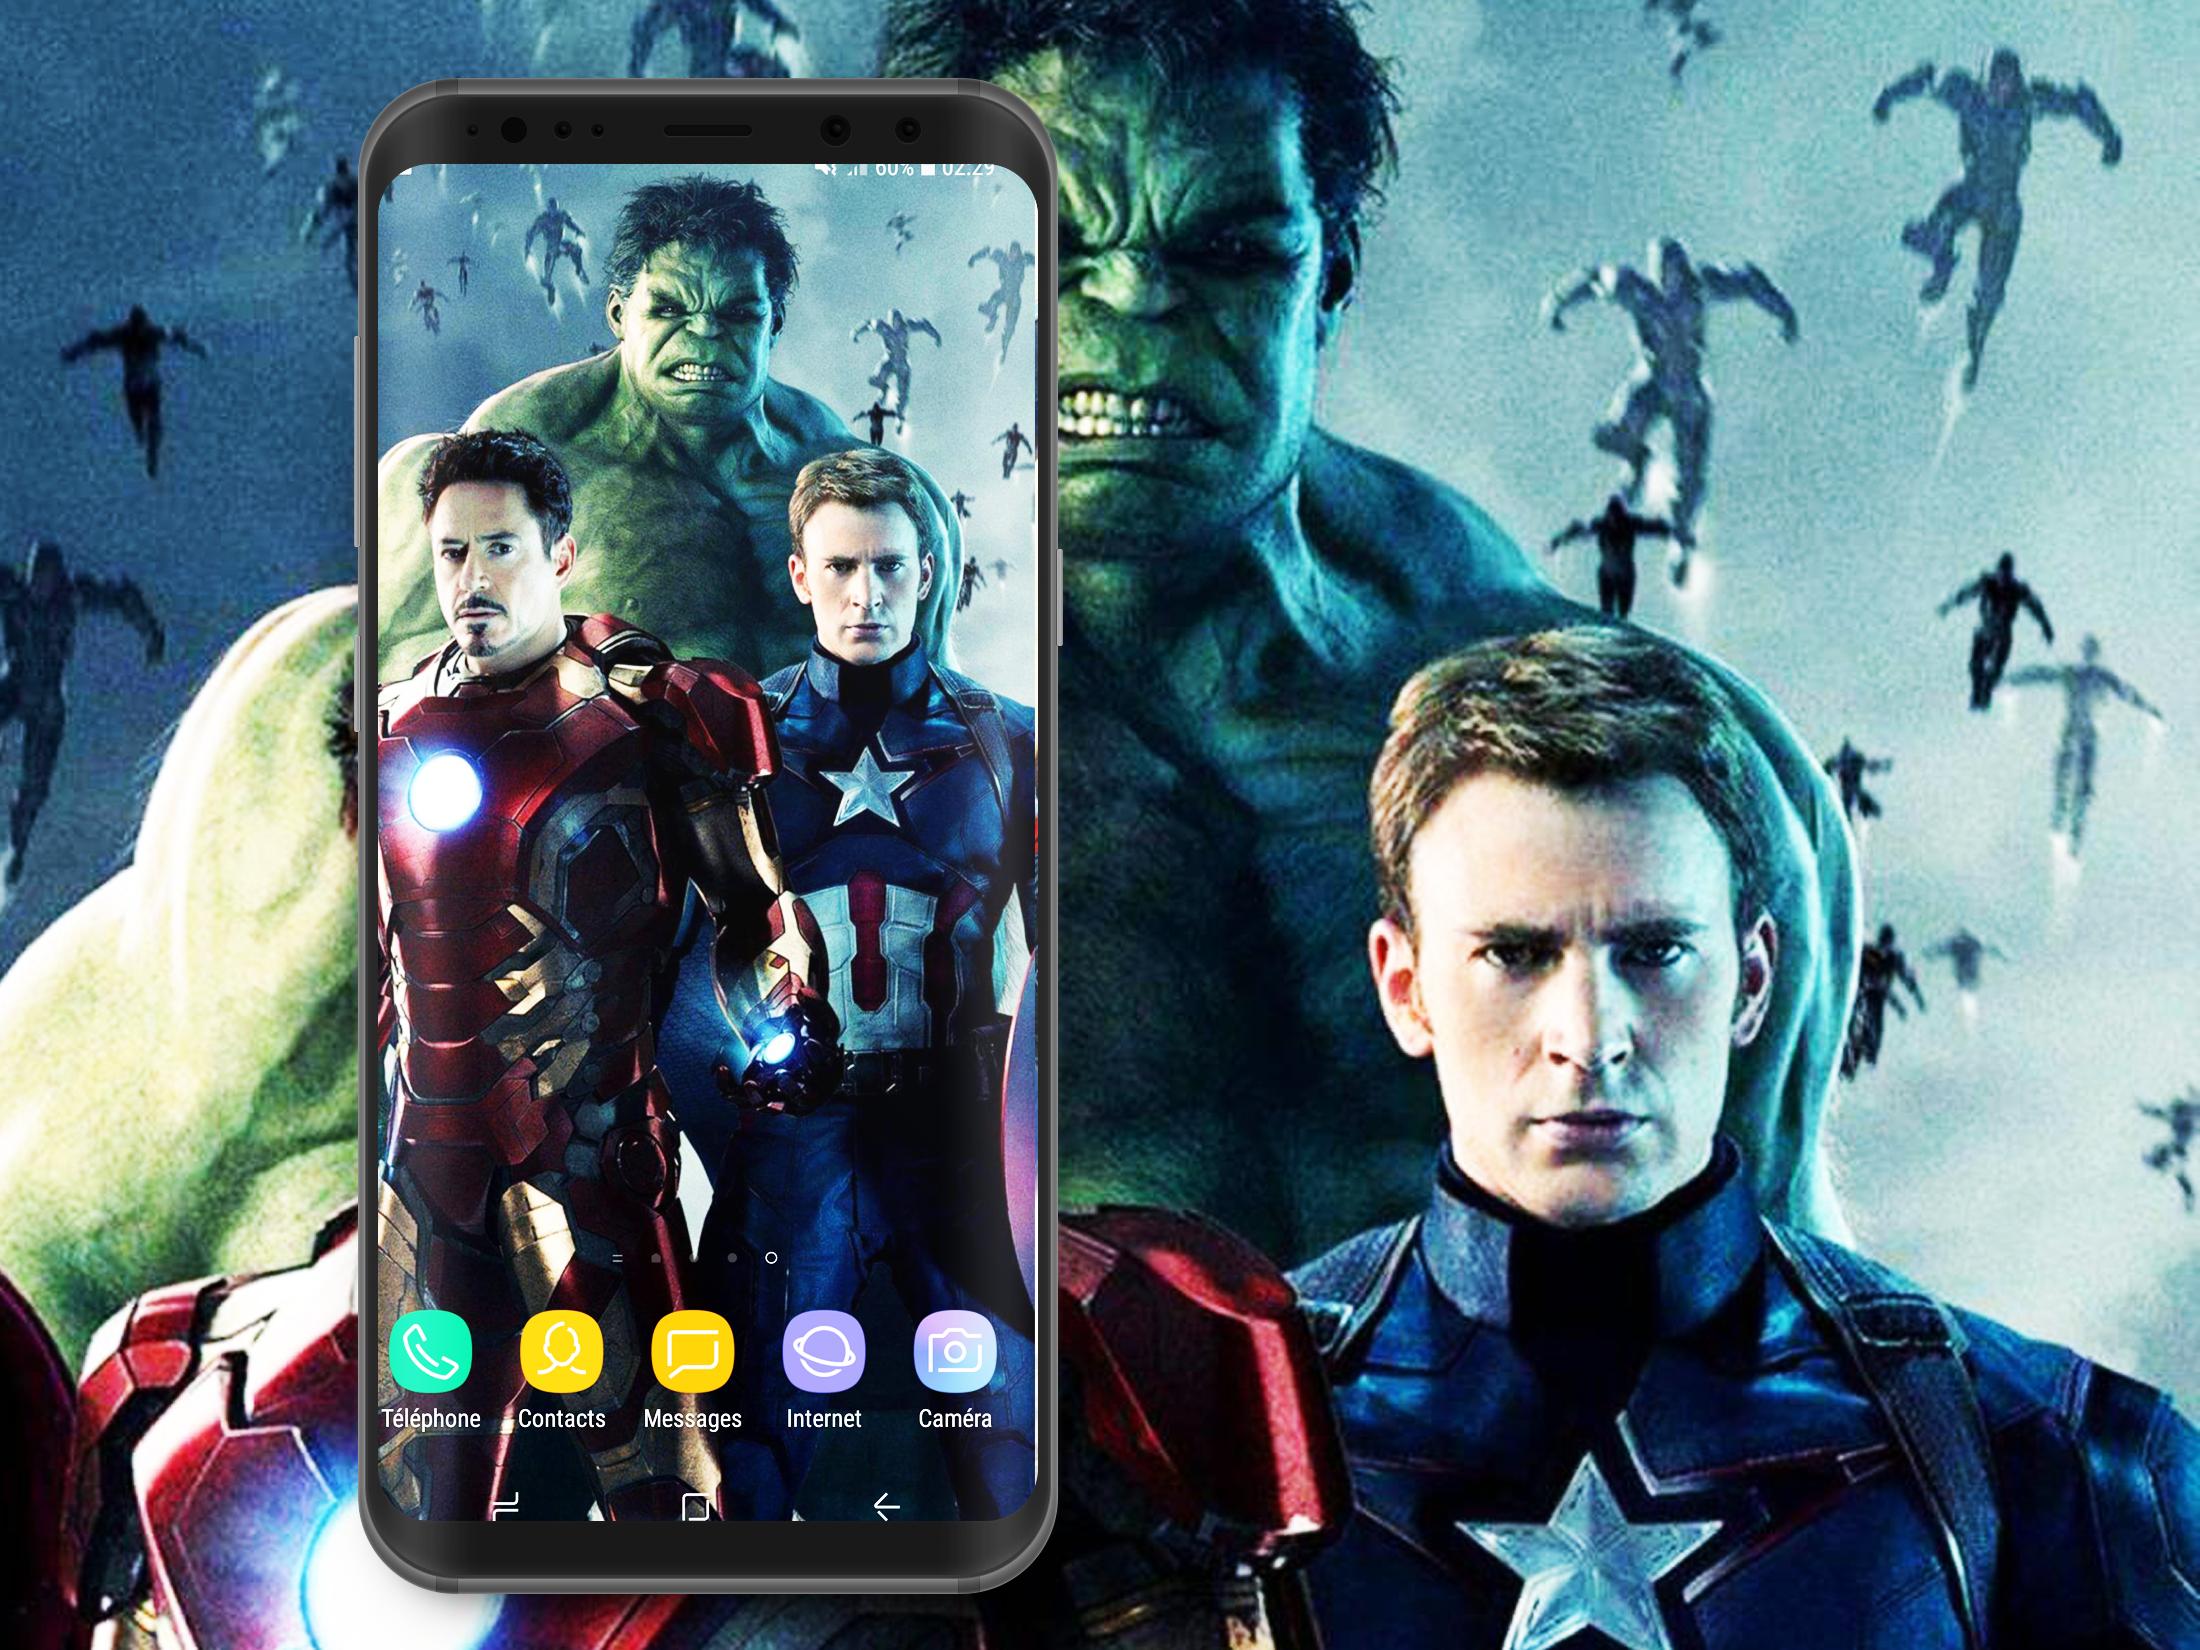 Captain America wallpaper 4K for Android - APK Download